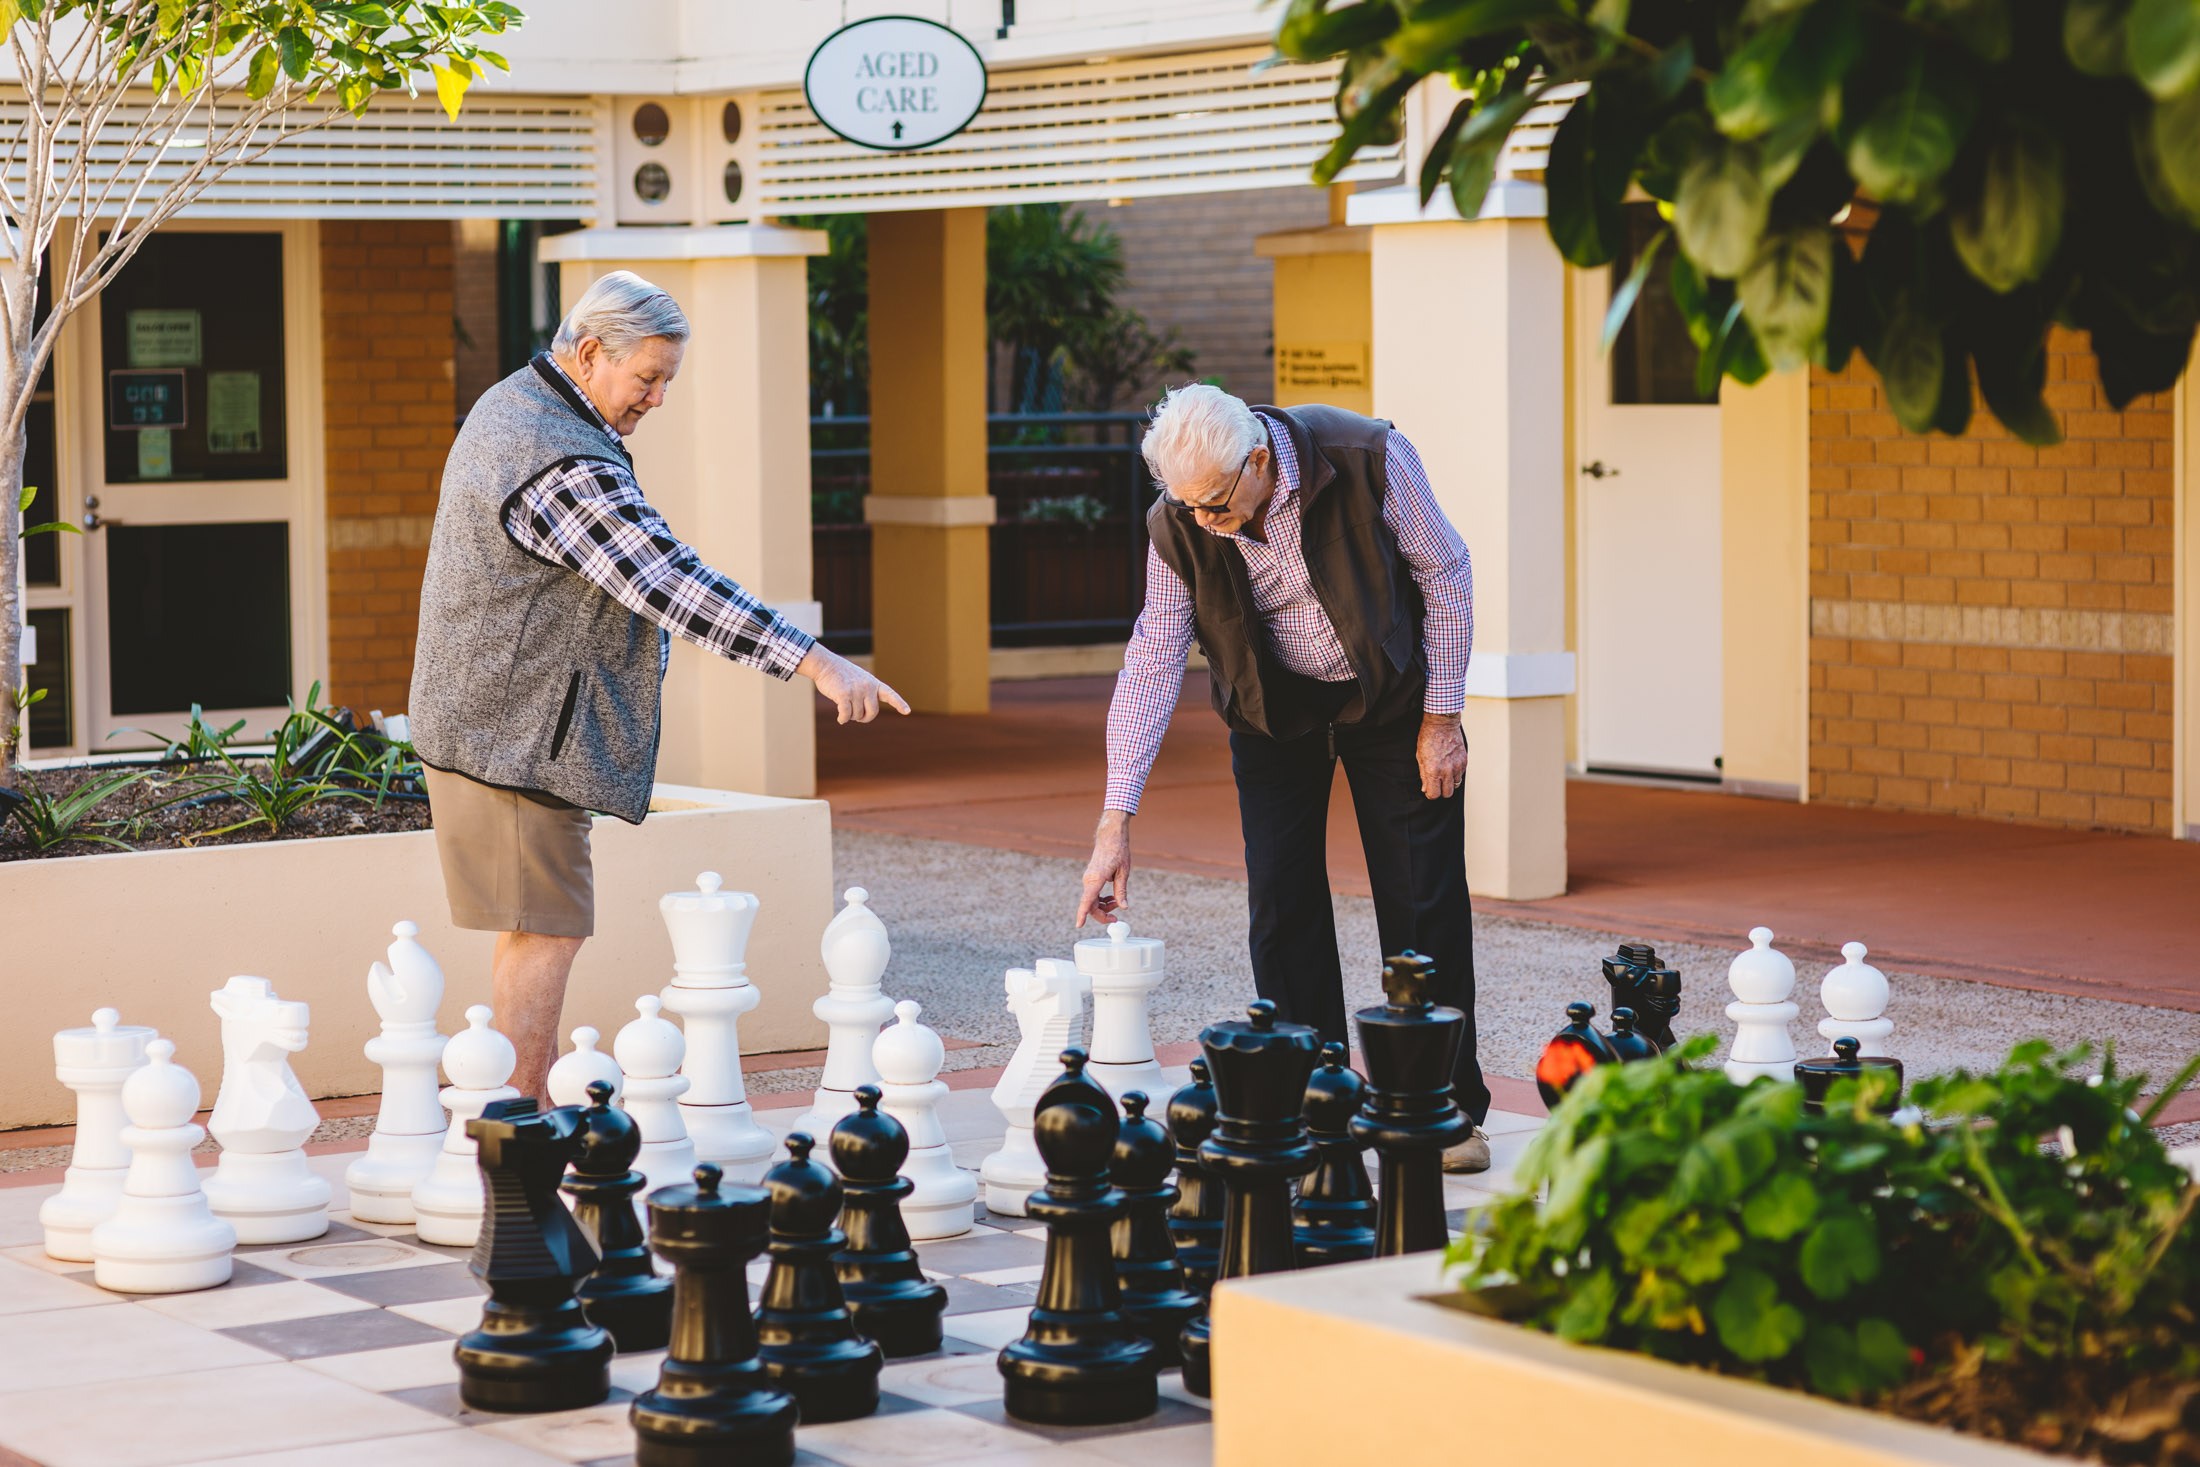 Outdoor chess